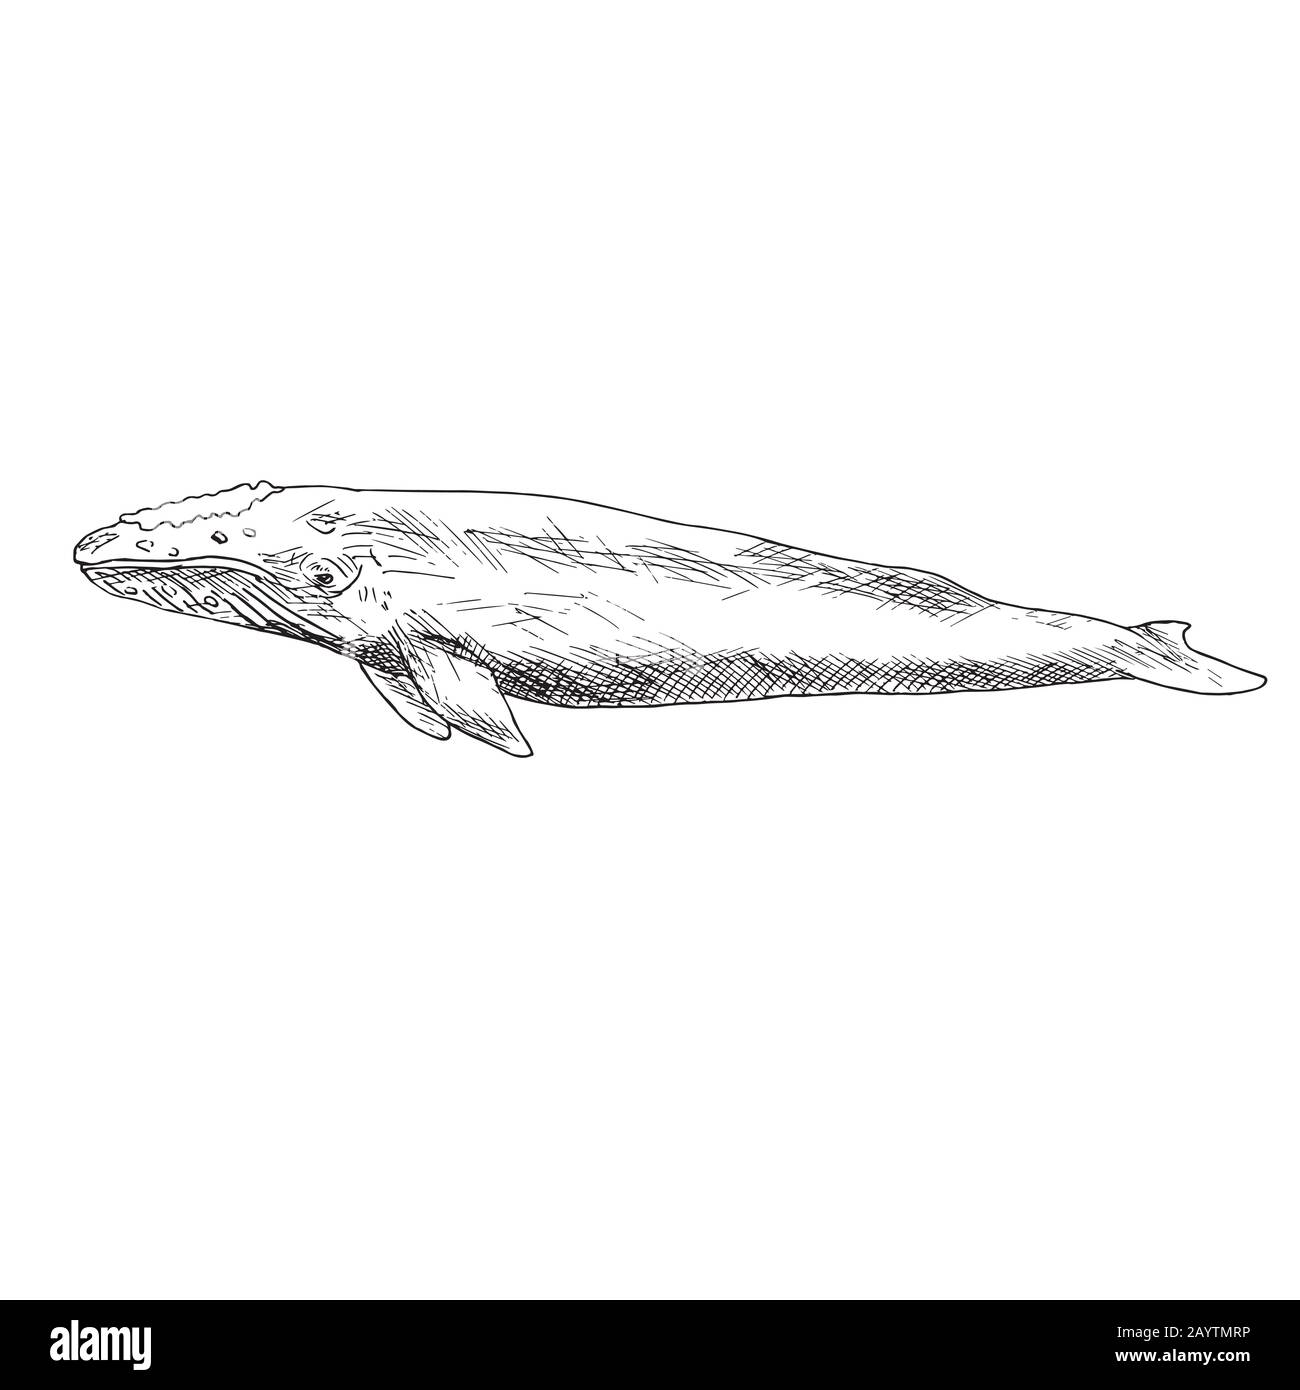 Blue Whale, hand drawn doodle, sketch, outline illustration Stock Photo